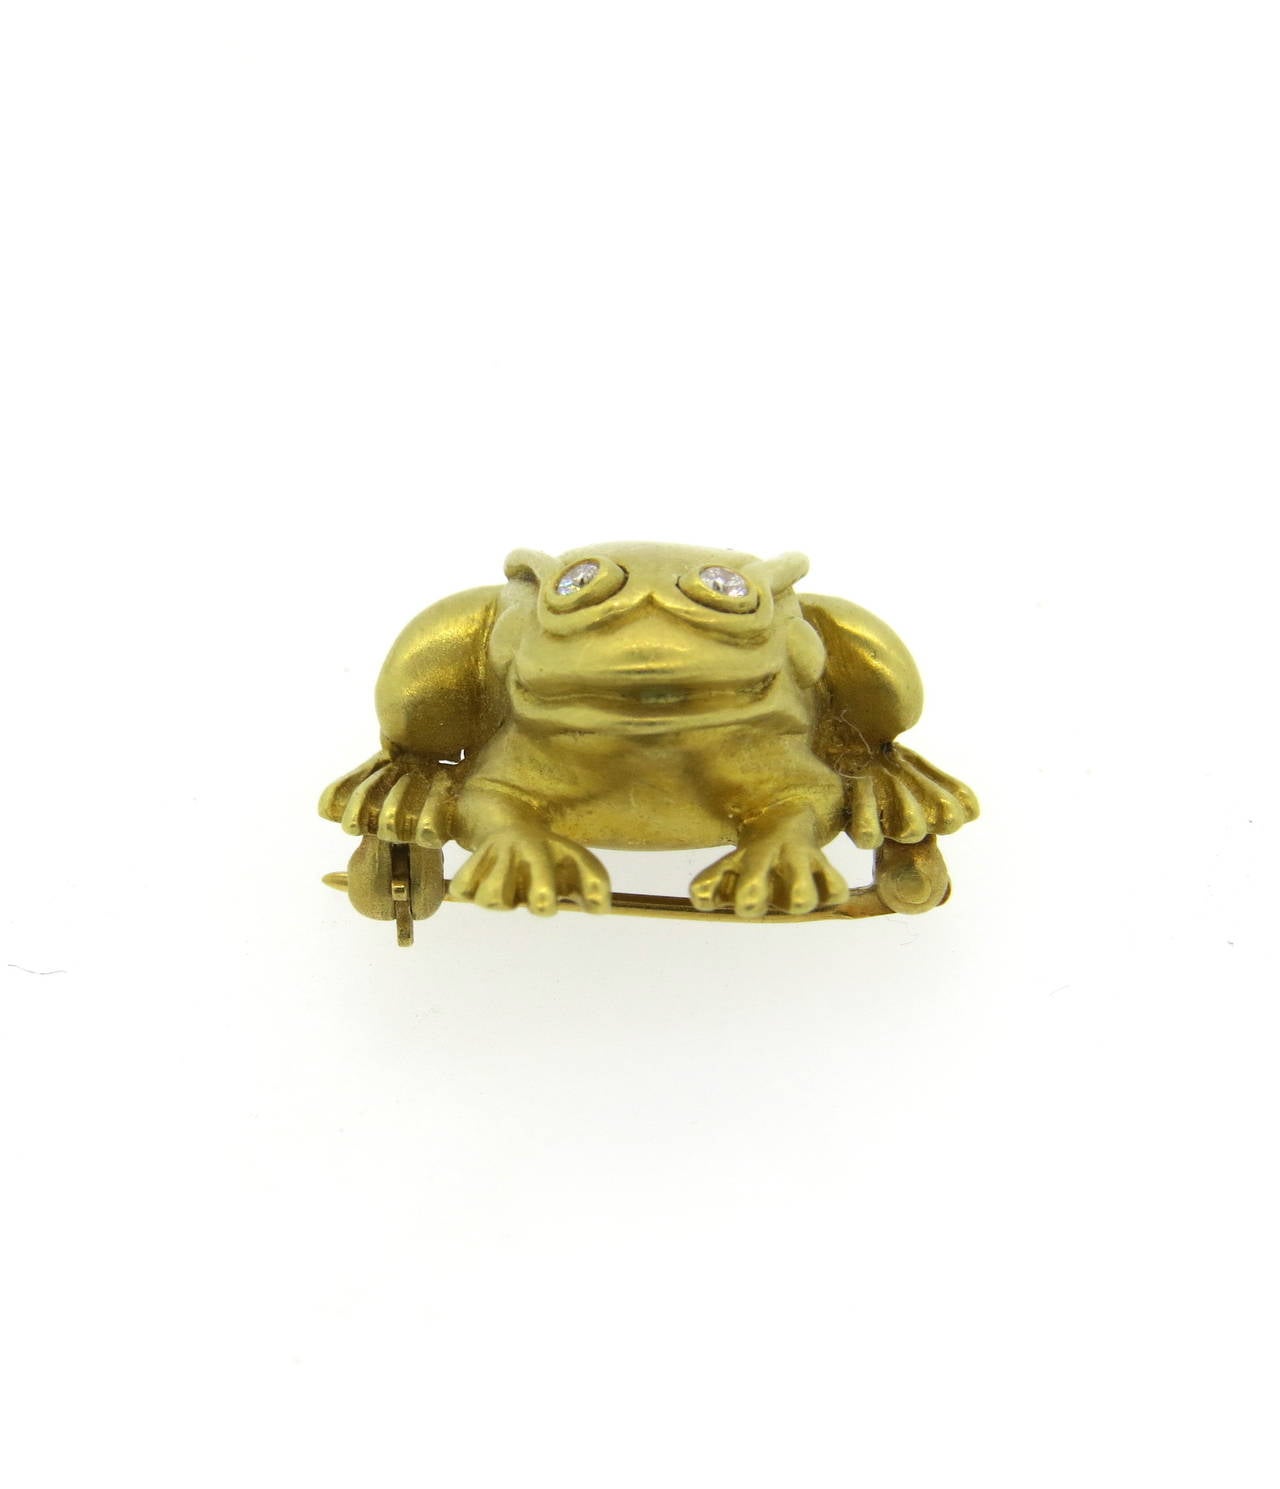 Adorable 18K gold Barry Kieselstein-Cord frog brooch featuring diamonds for eyes. Pin measures 25mm x 23mm. Marked Kieselstein Cord 750, weighs 12.0 grams.